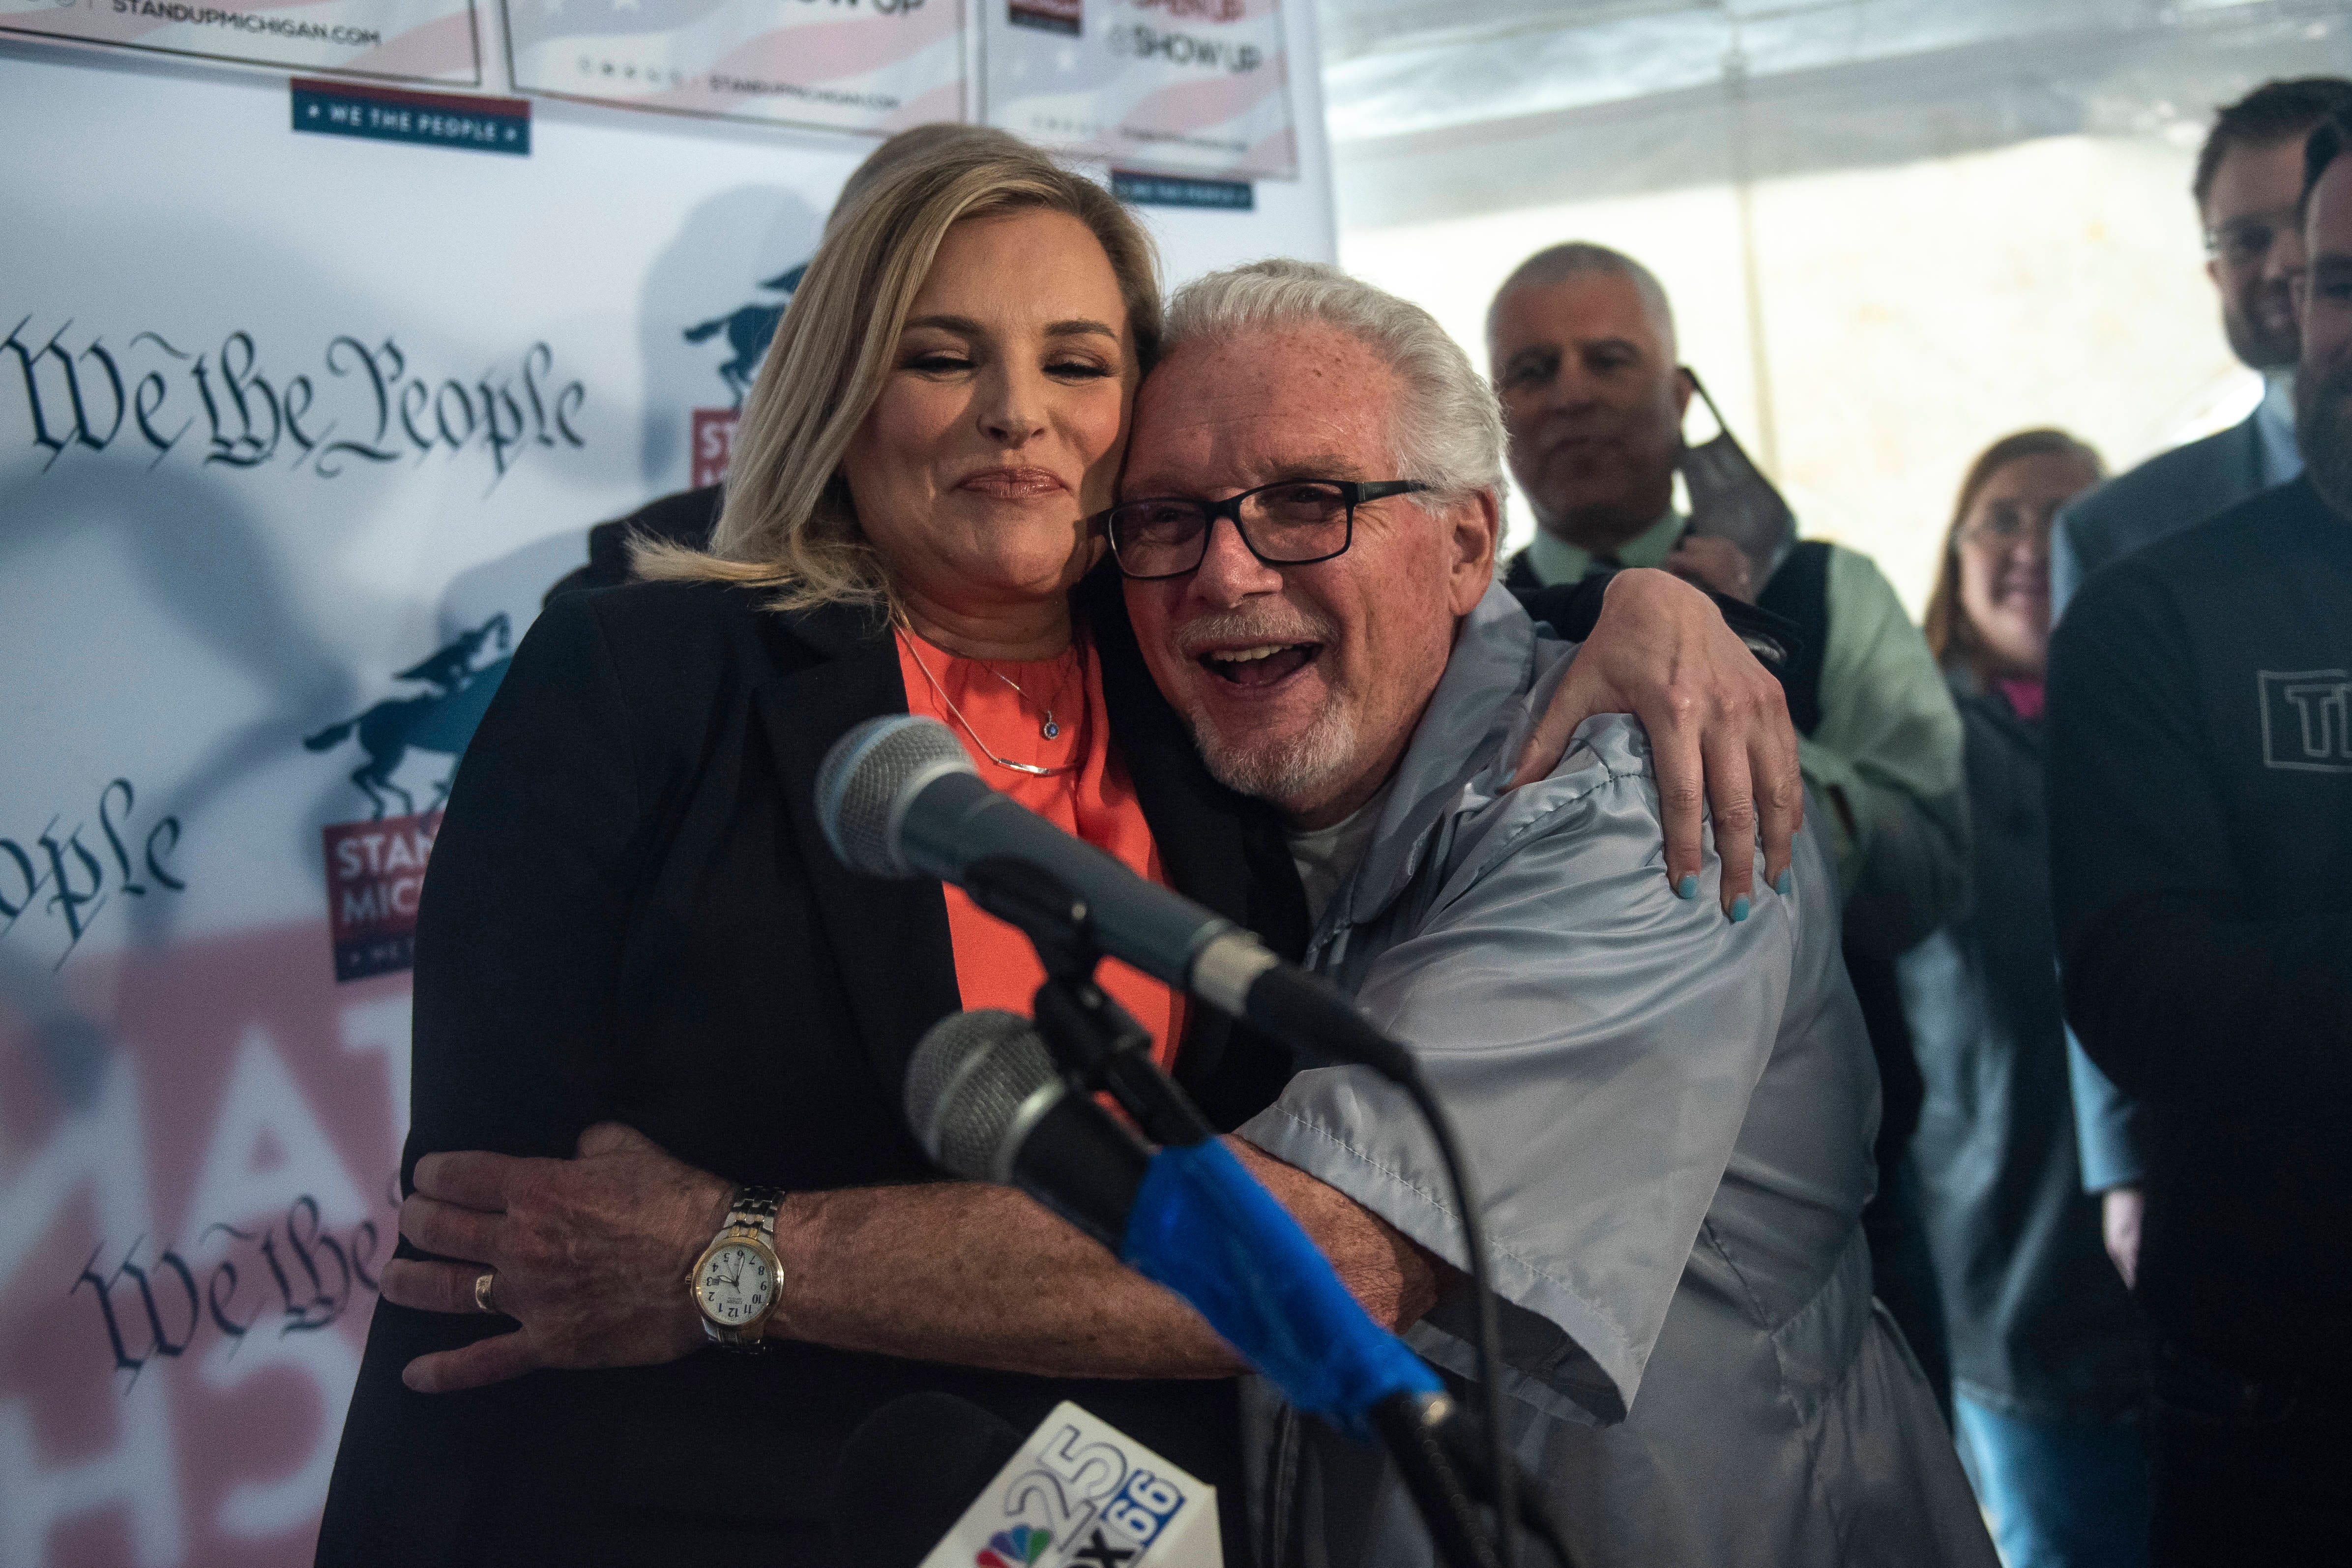 North Dallas, Texas salon owner Shelley Luther, left, and Owosso barber Karl Manke embrace during the press conference.